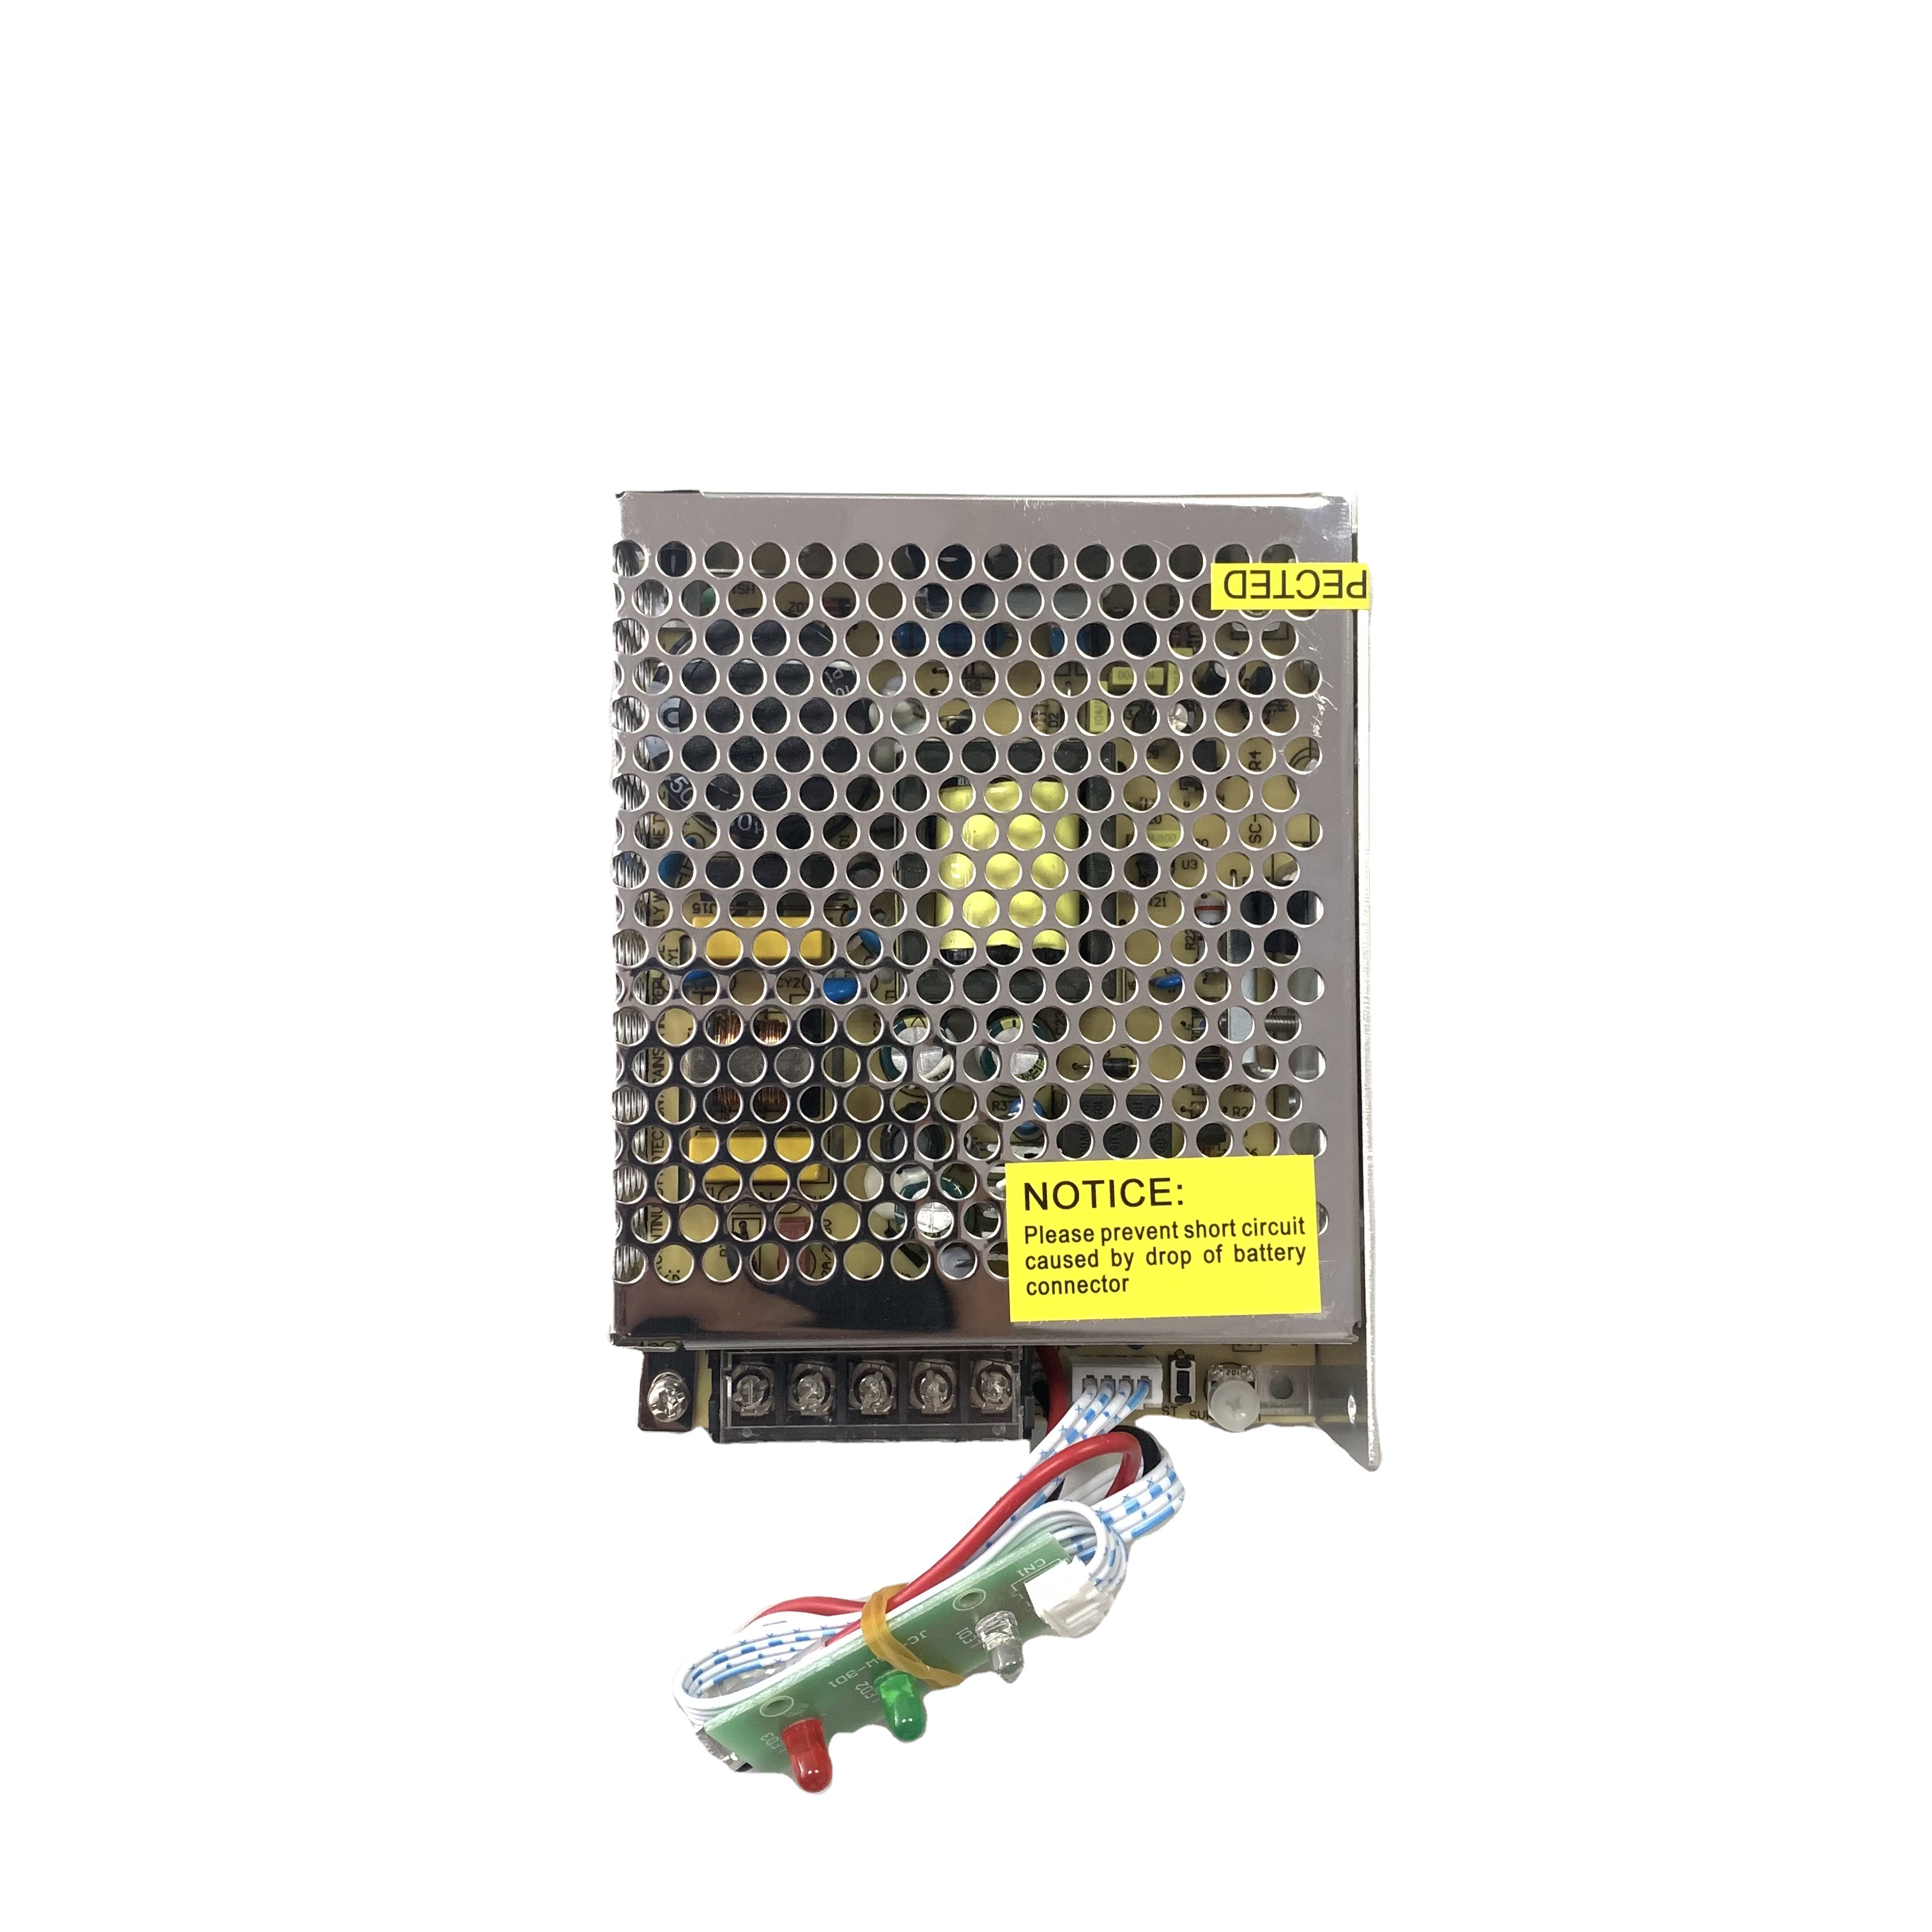 What are the characteristics of UPS power supply